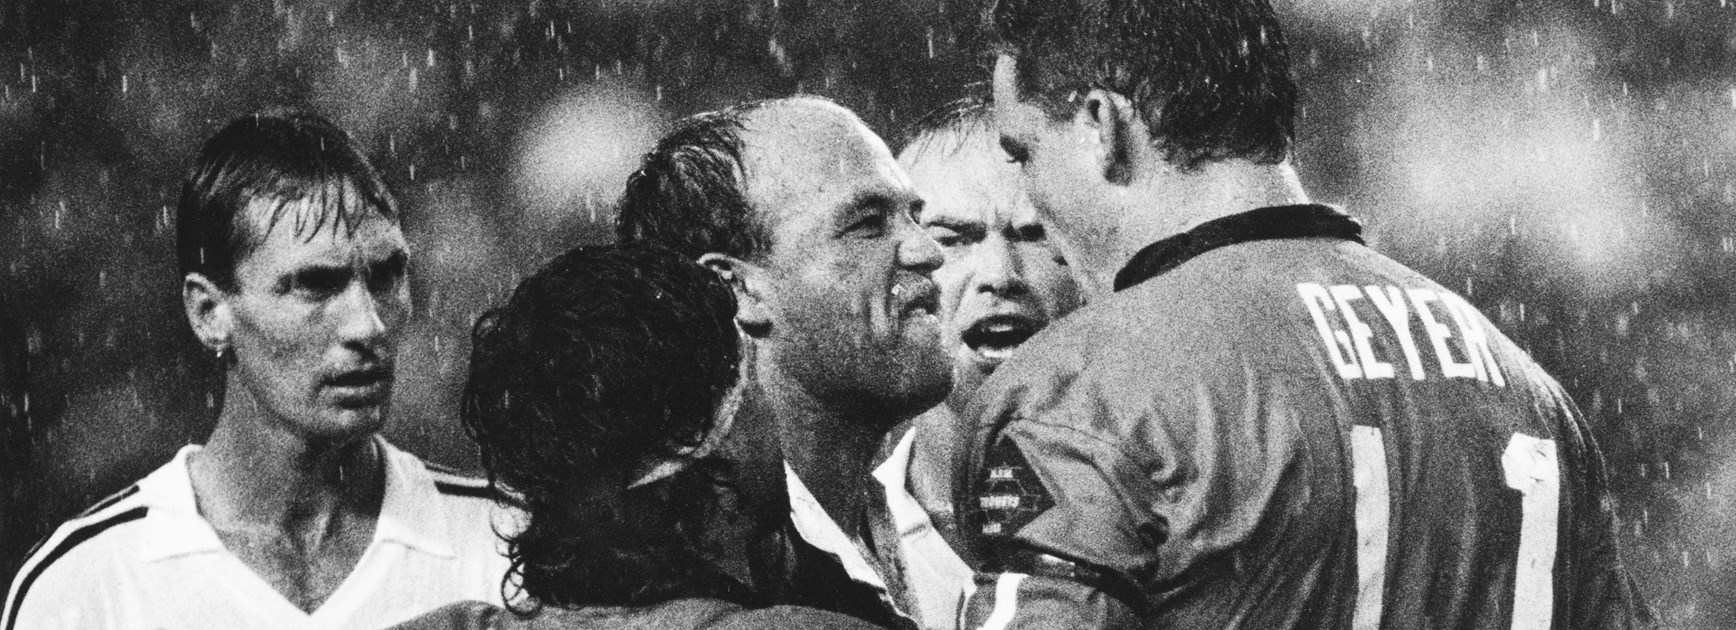 Wally Lewis and Mark Geyer face off in State of Origin, 1991.